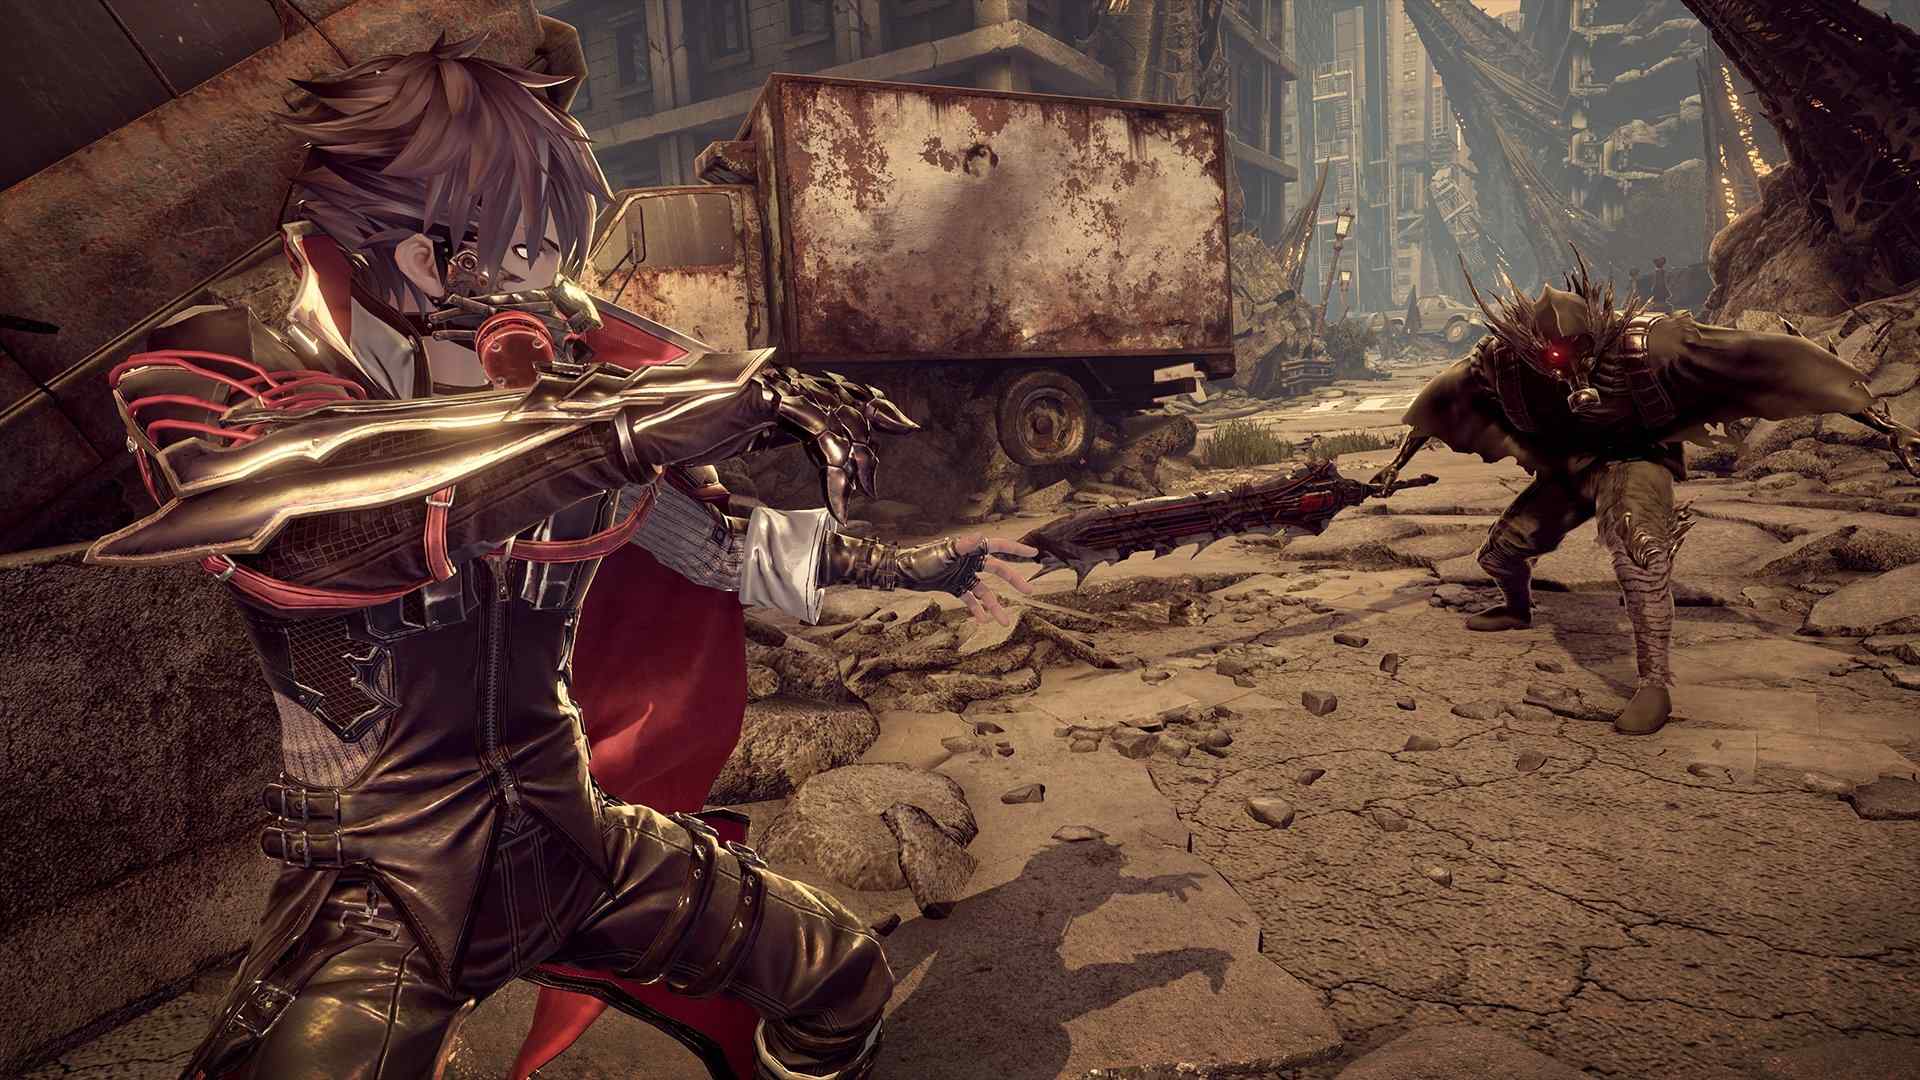 Code Vein is an action RPG that transports players to a dark and stylish world where they must battle vampiric foes and uncover a complex, post-apocalyptic narrative.